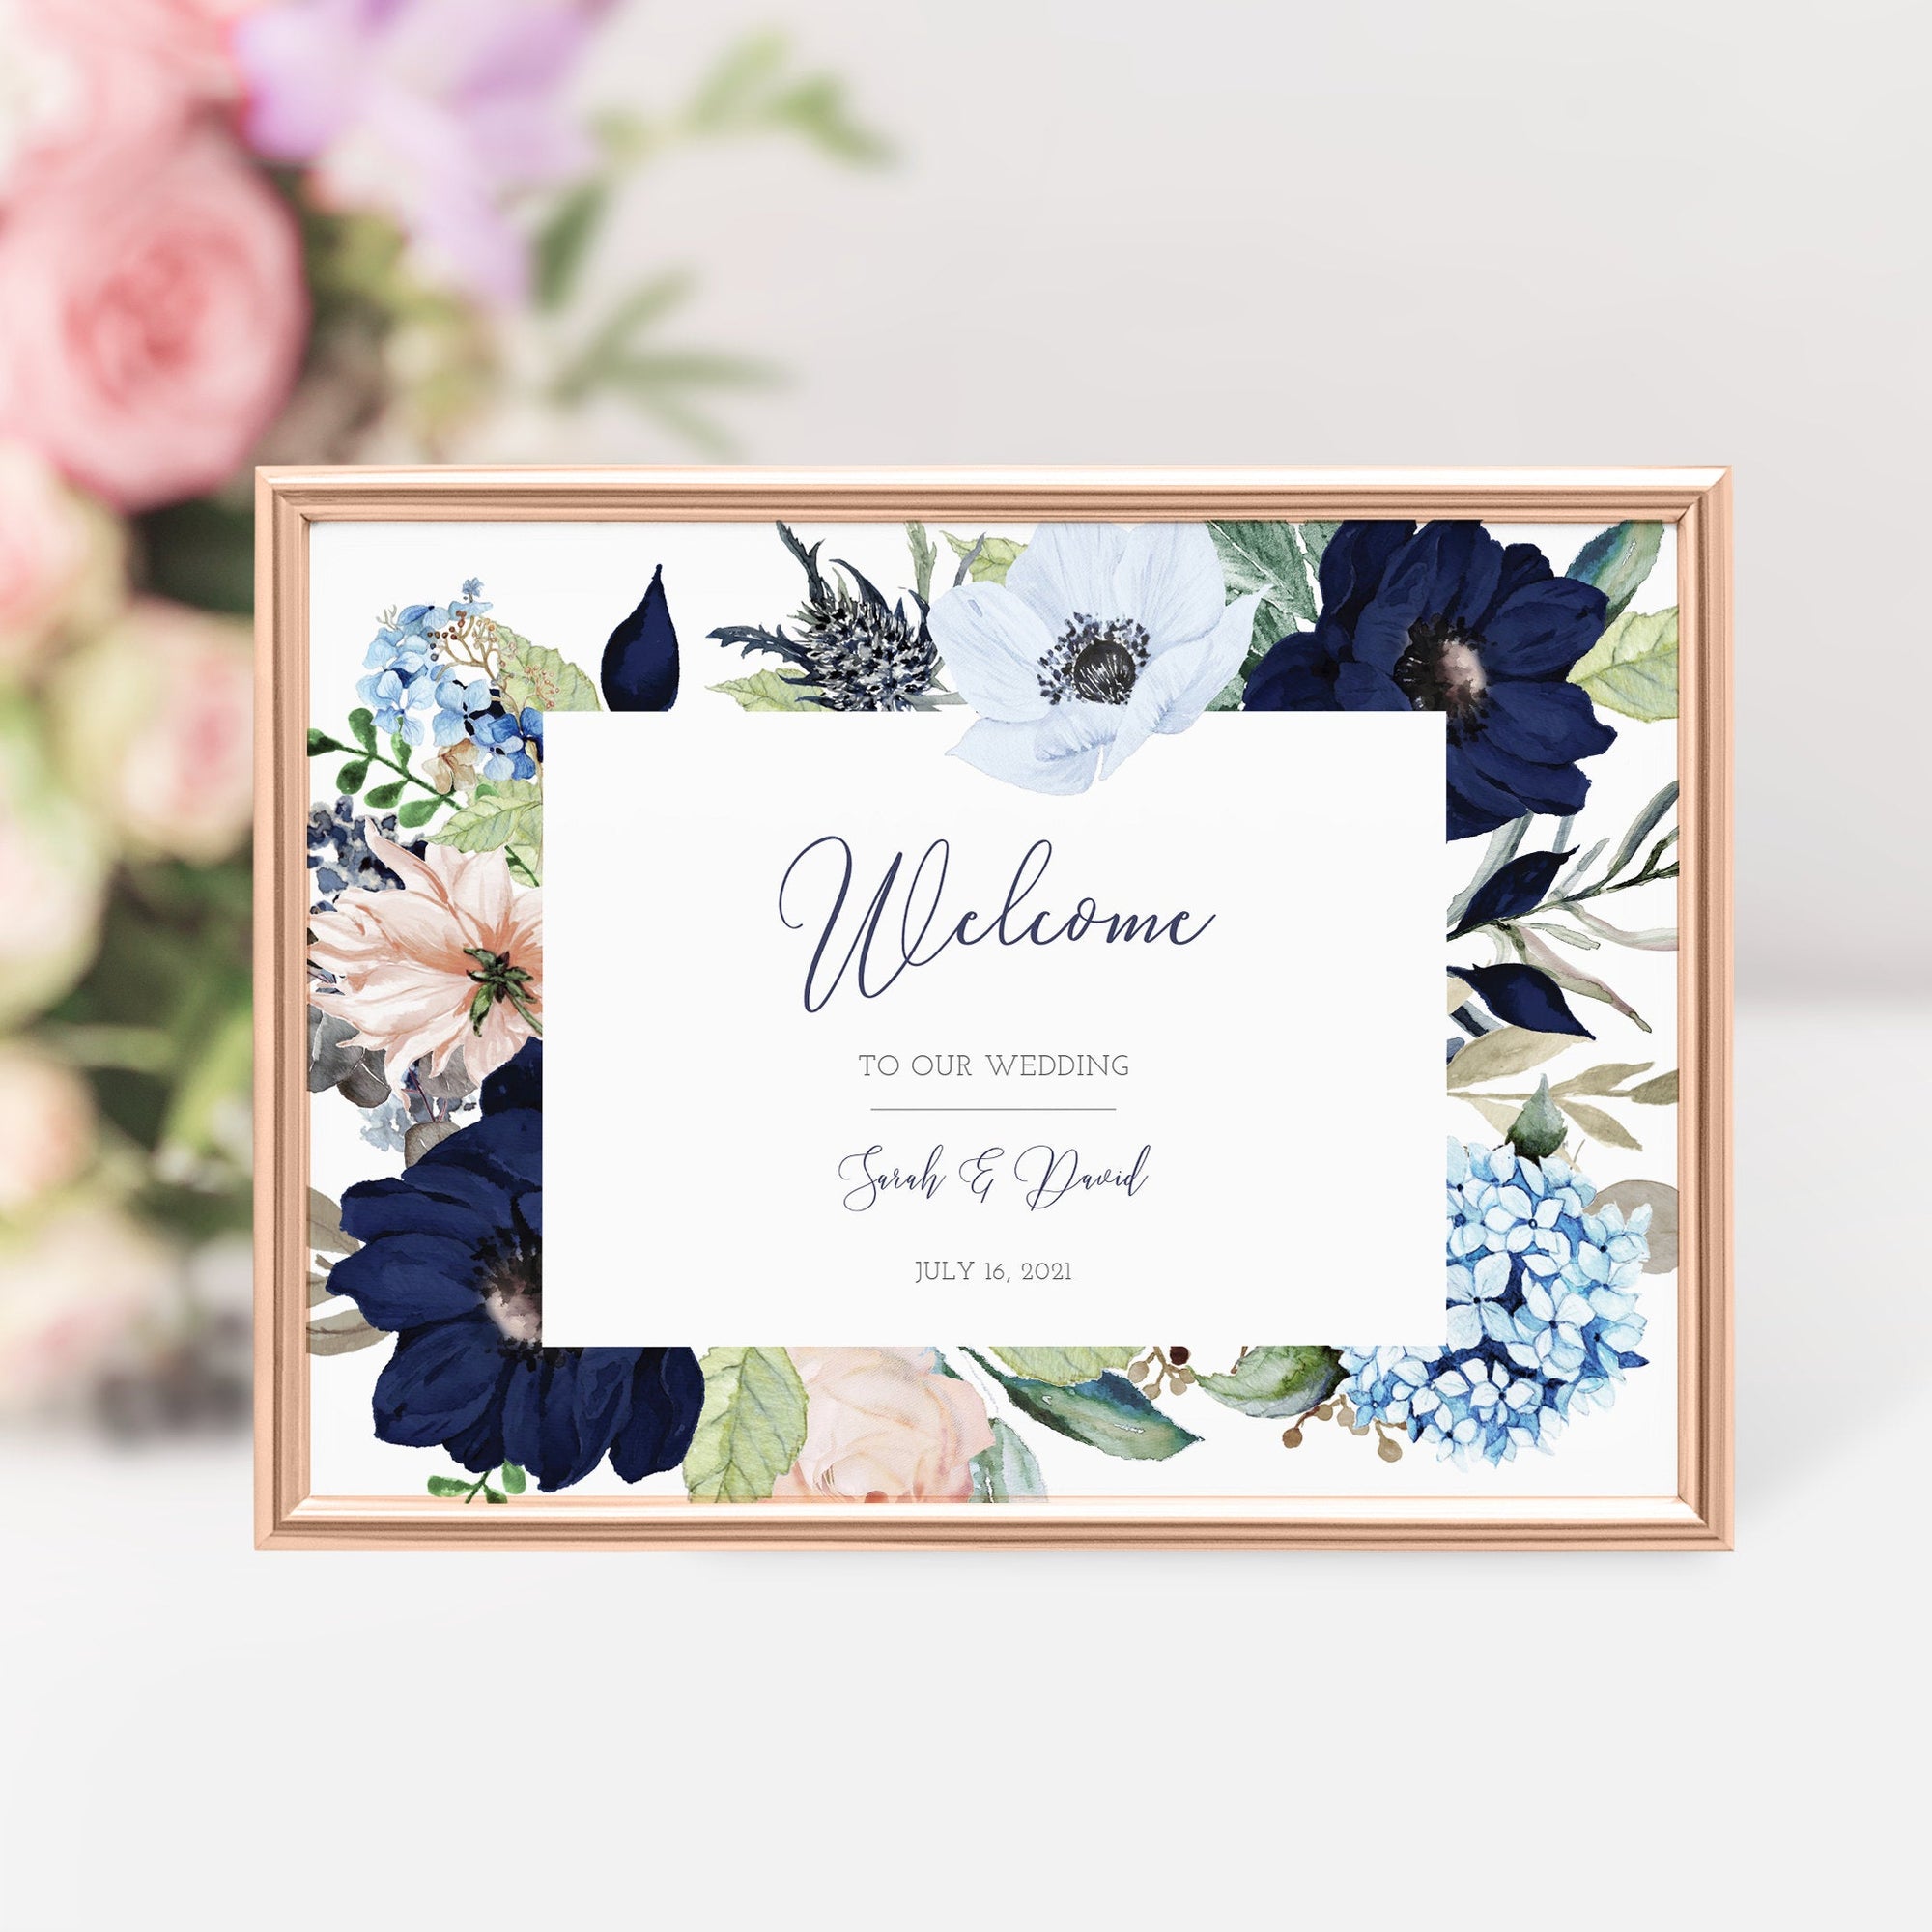 Welcome To Our Wedding Sign Template, Navy and Blush, Large Wedding Welcome Sign Template, Wedding Ceremony Sign, DIGITAL DOWNLOAD MB100